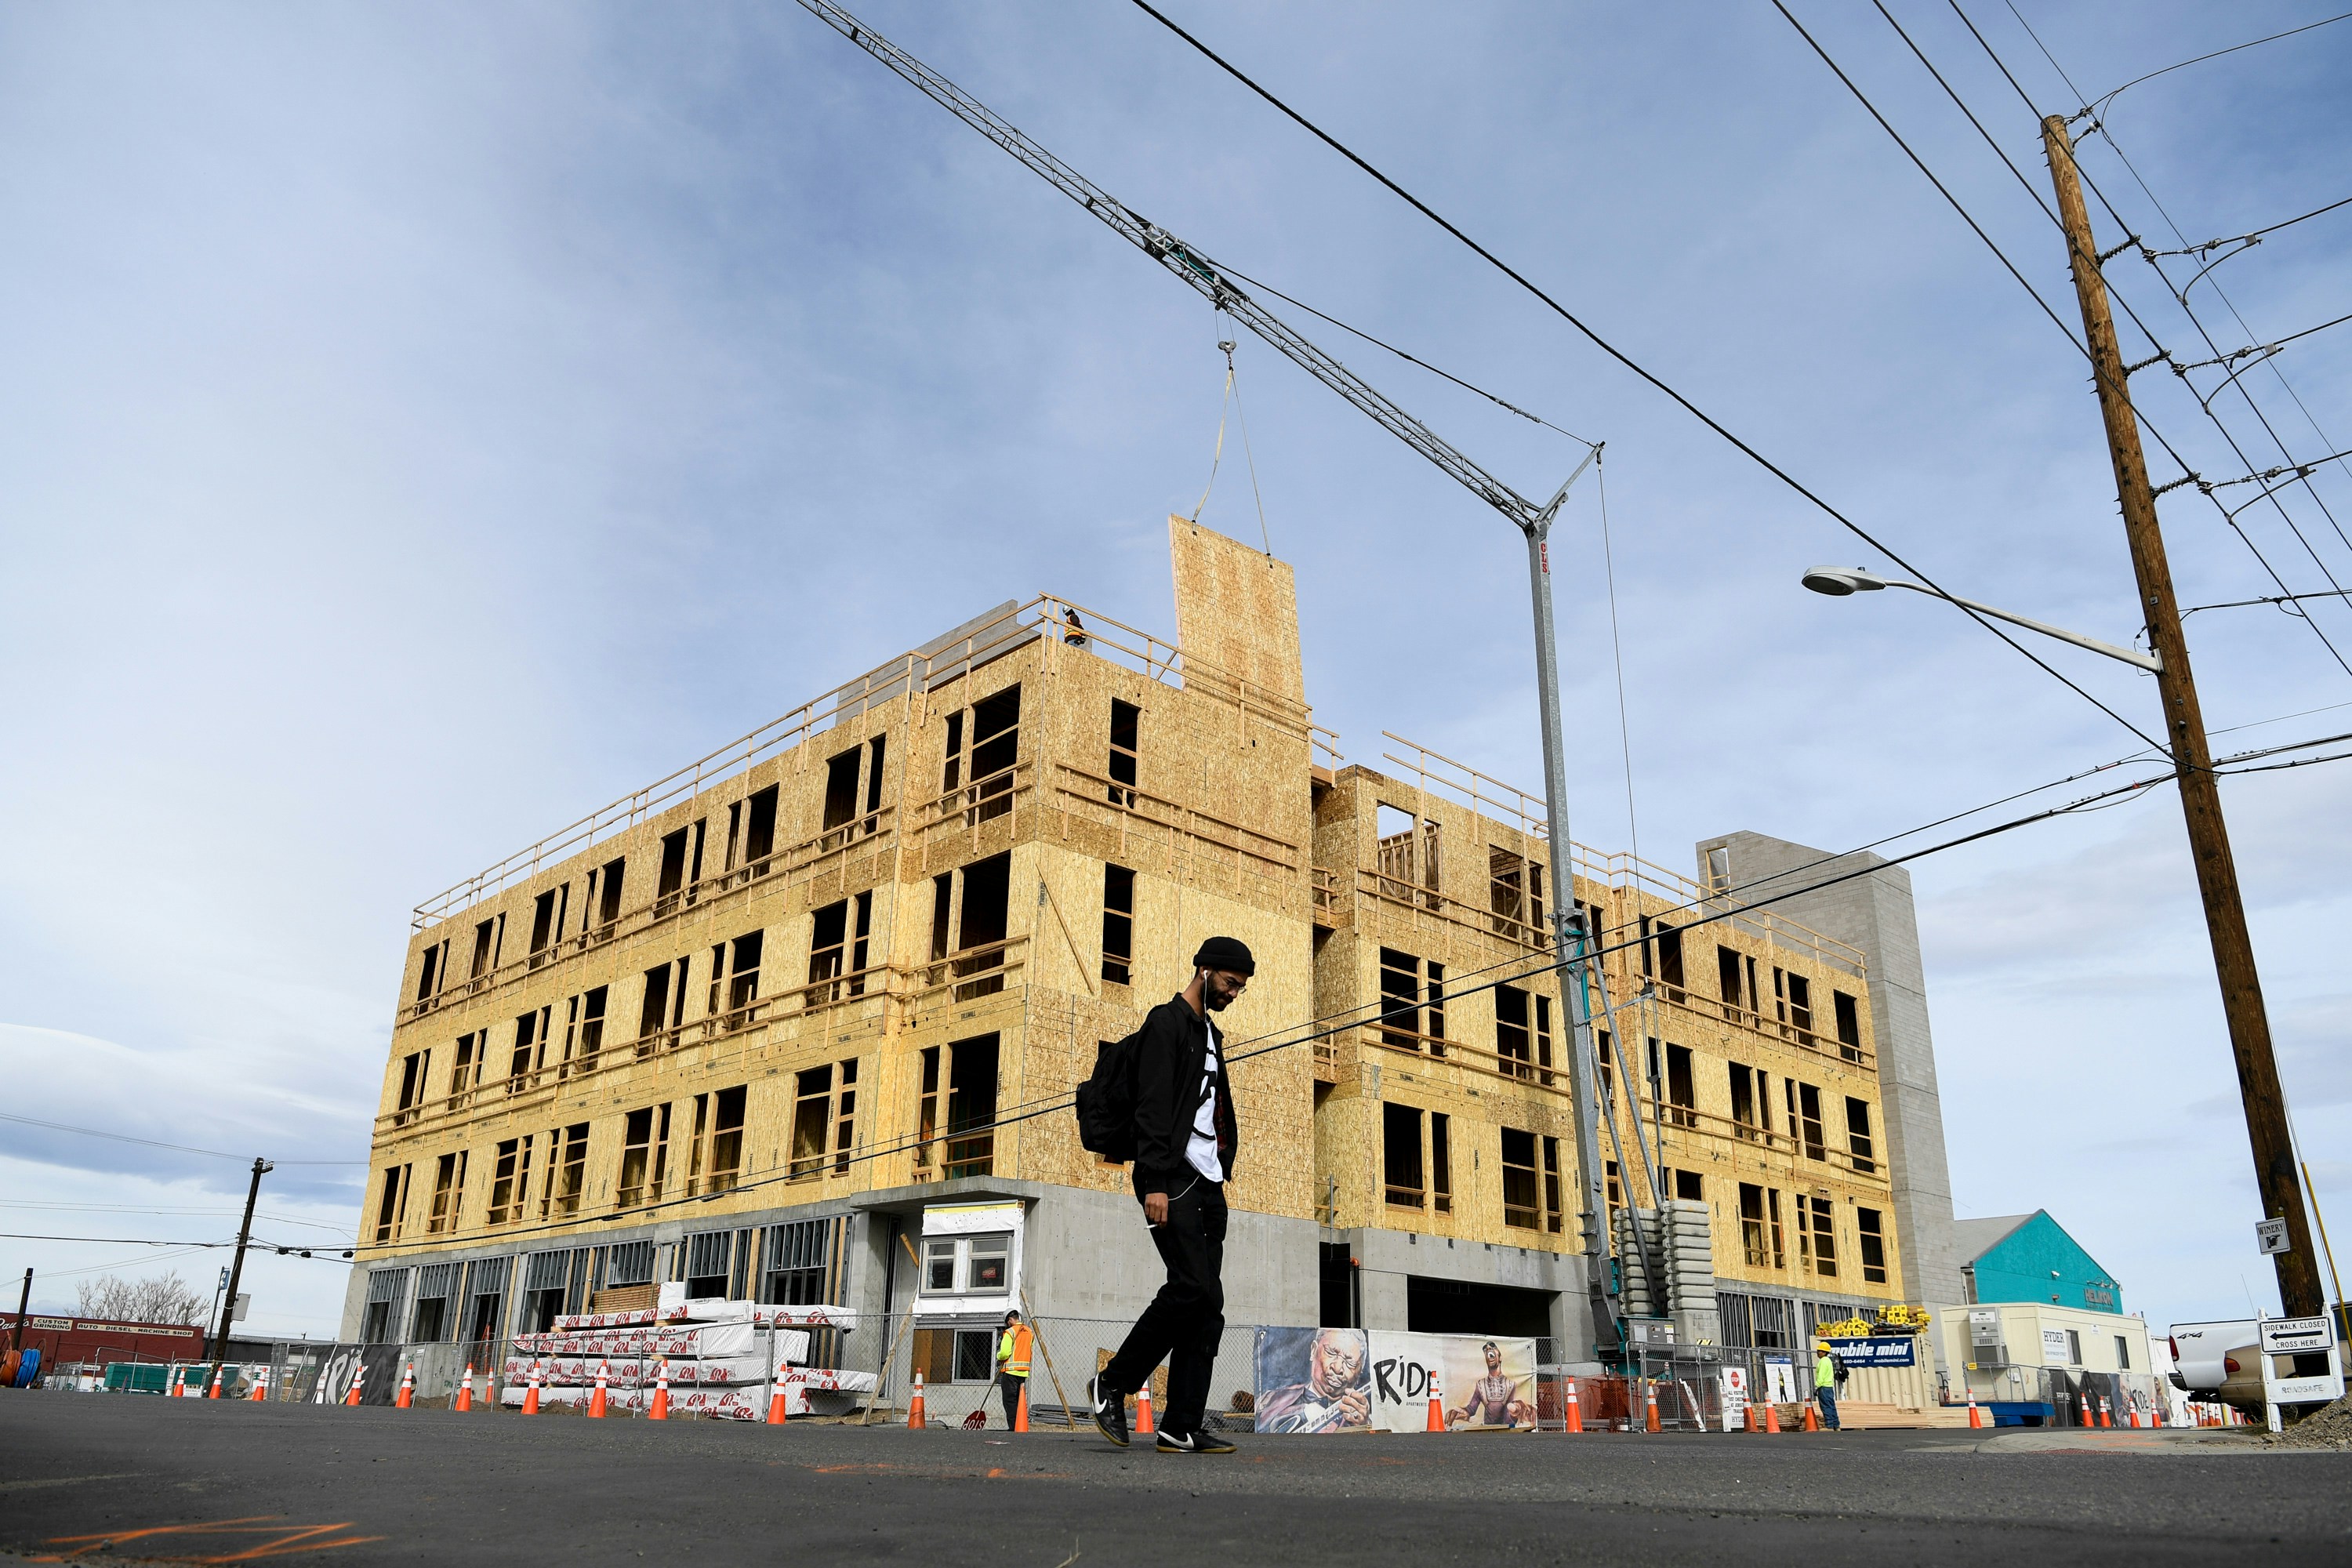 DENVER, CO - FEBRUARY 8: Kahlil Zawadi walks near 36th and Wynkoop in front of a construction on Thursday, February 8, 2018. On Monday night, Denver City Council is poised to approve a long-formulated zoning proposal for the 38th/Blake transit station area that, for the first time in the city's history, will allow developers to build even higher than regular zoning allows  up to 16 stories in some places  as long as they provide more affordable housing as part of their projects. Some developers are eyeing potential projects that would take advantage of this, but they cannot get started until this is passed.(Photo by AAron Ontiveroz/The Denver Post via Getty Images)